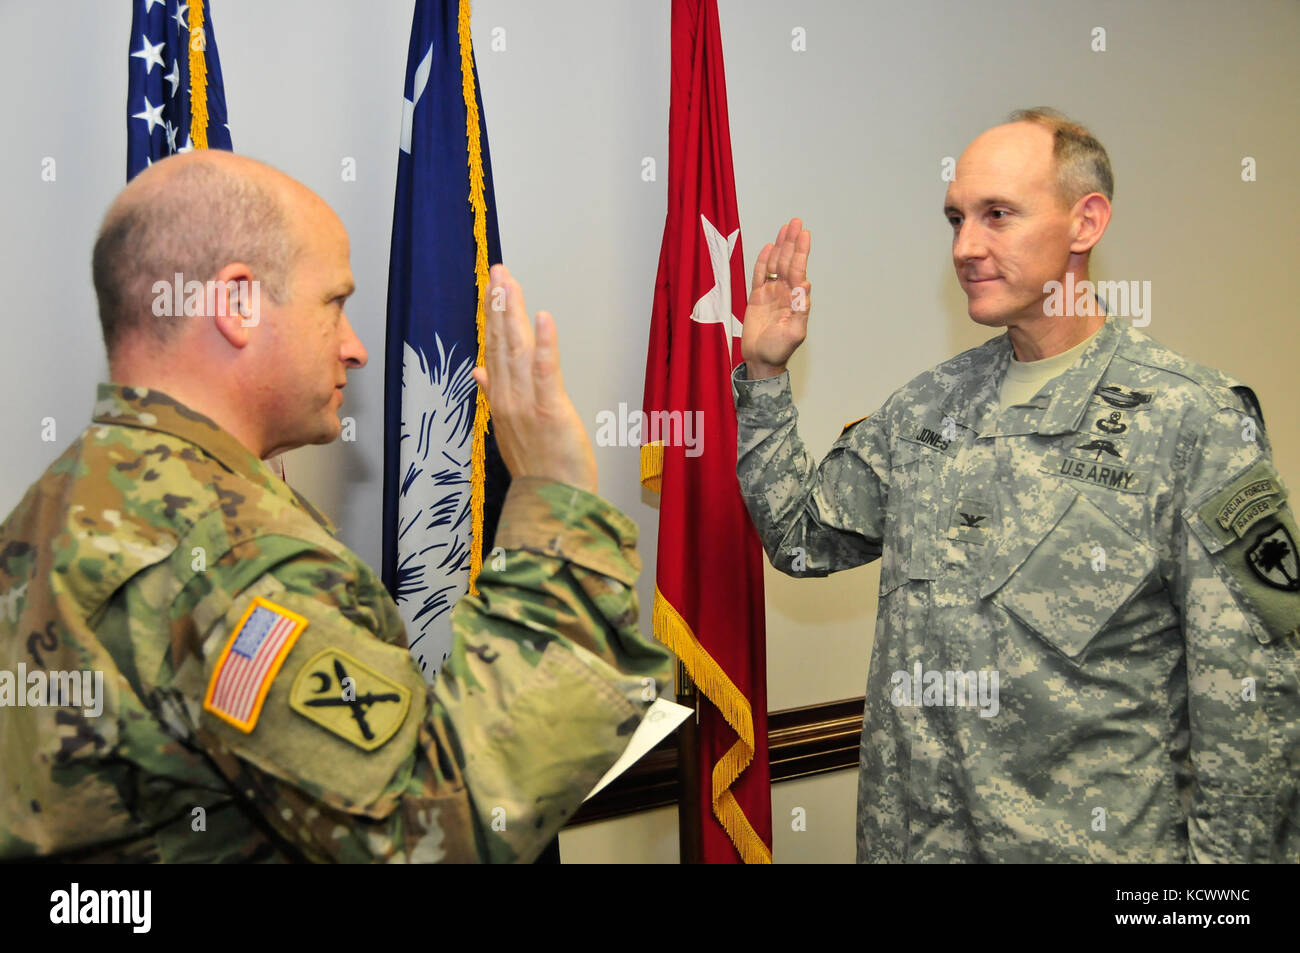 U.S. Army Maj. Gen. Robert R. Livingston, Jr. Adjutant General for South Carolina swears in U.S.Army Col. Barry G. Jones as the new Inspector General for South Carolina at the Ajutant Generals Complex Columbia S.c.,  April 7, 2016. Jones was most recently an instructor at the Air War College at Maxwell Air Force Base. (U.S. Army National Guard Photo by 2nd Lt. Tracci Dorgan-Bandy/Released) Stock Photo